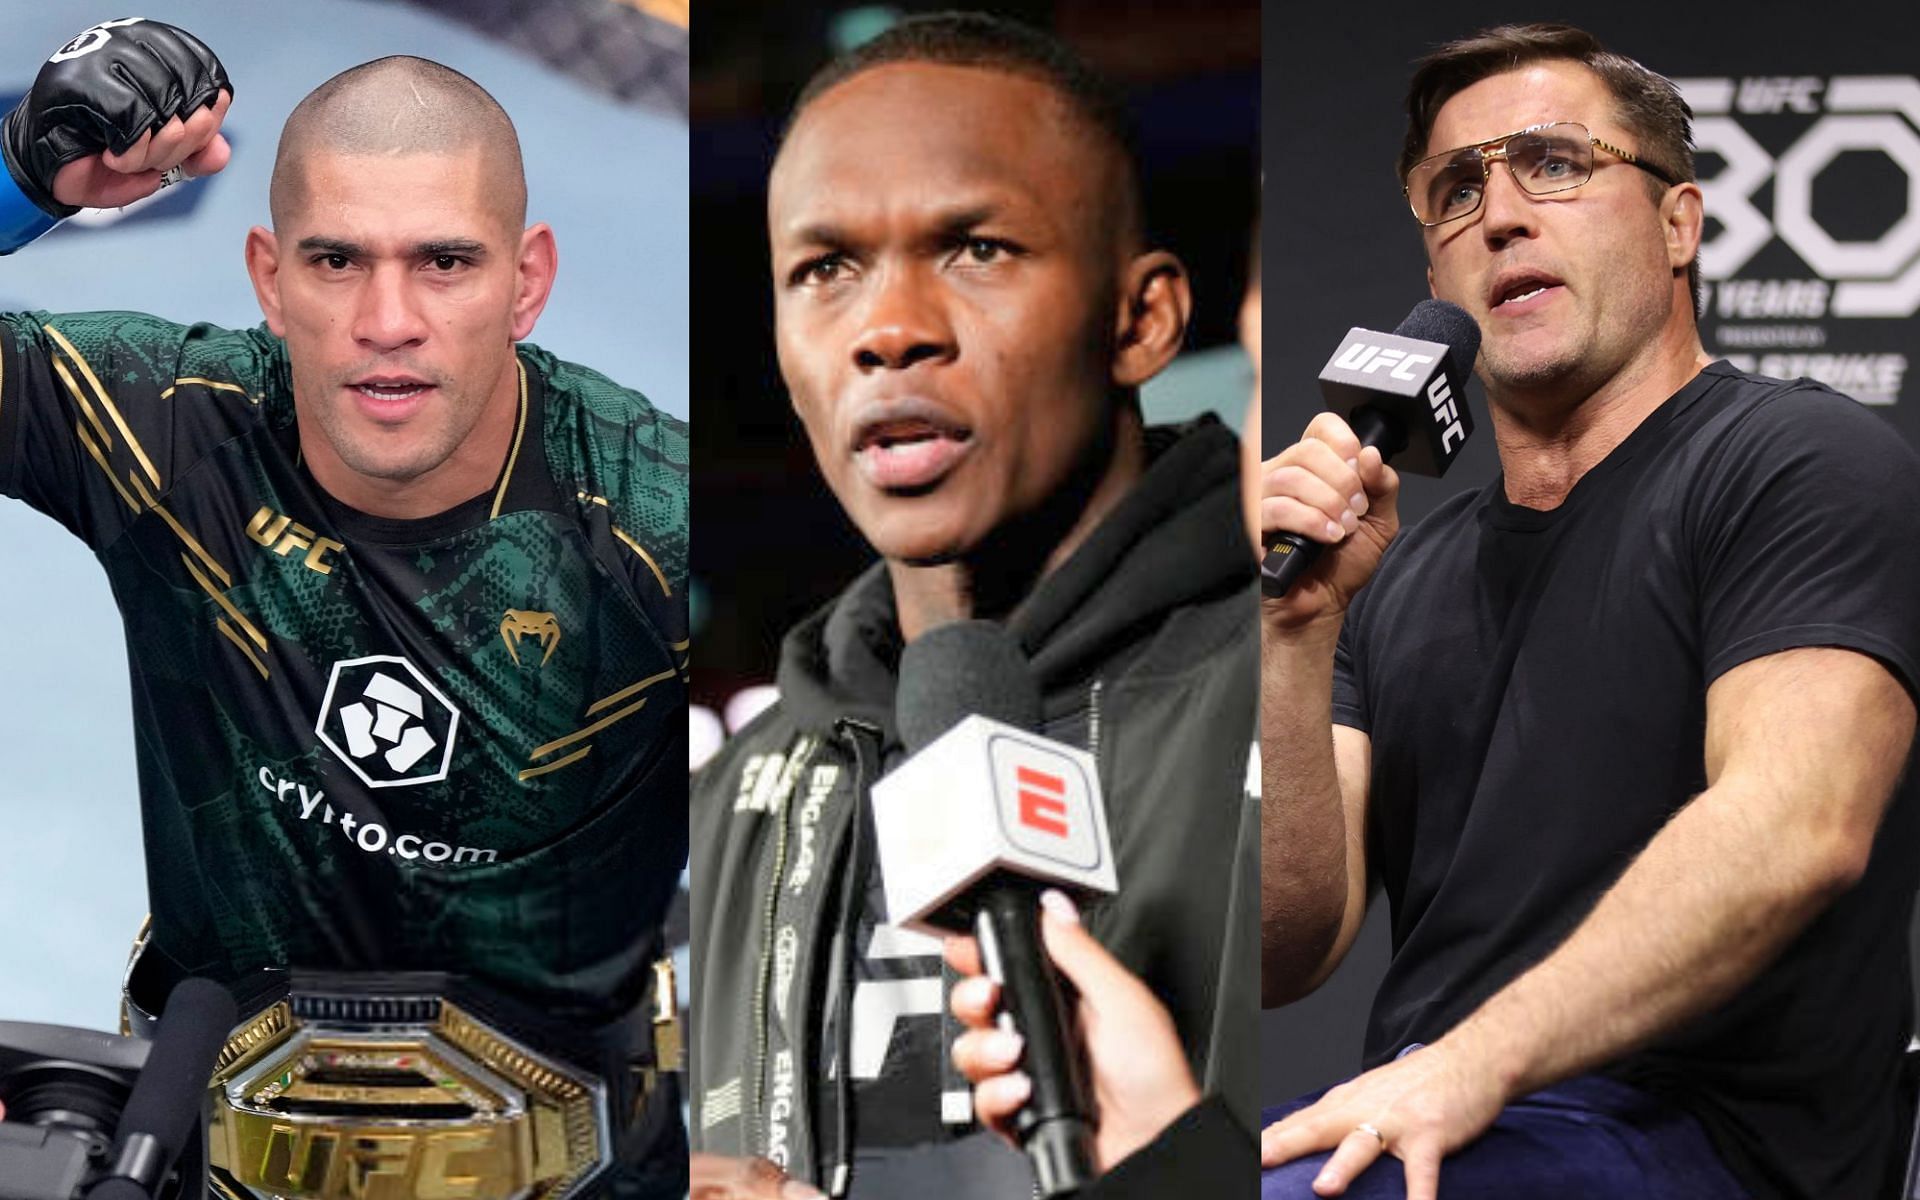 Alex Pereira (left), Israel Adesanya (middle) and Chael Sonnen (right) [Images Courtesy: @GettyImages]